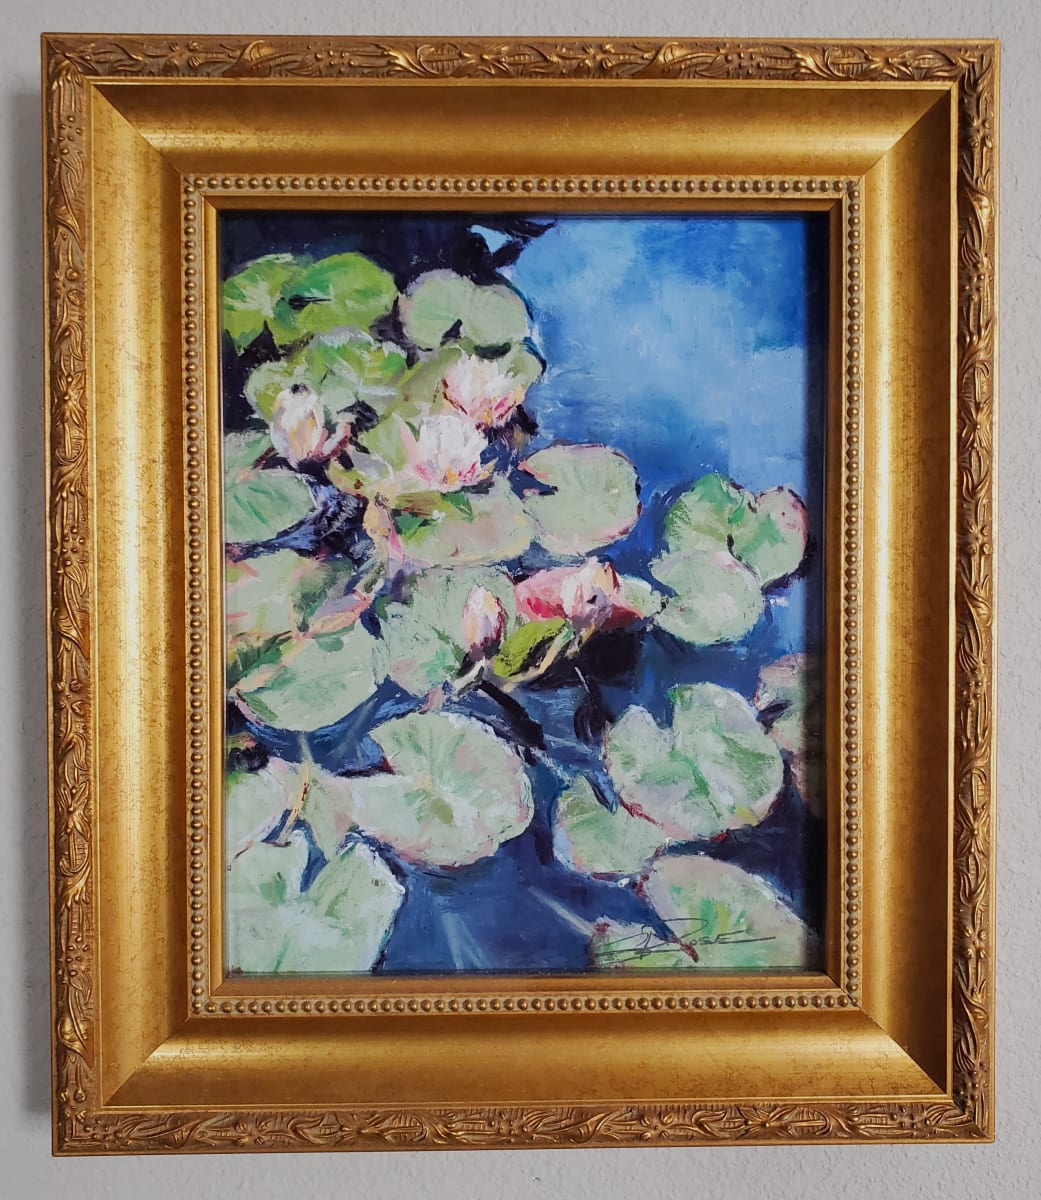 Water Lilies by Sue Rose  Image: Water Lilies of the Denver Botanic Gardens, a pastel painting by Sue Rose